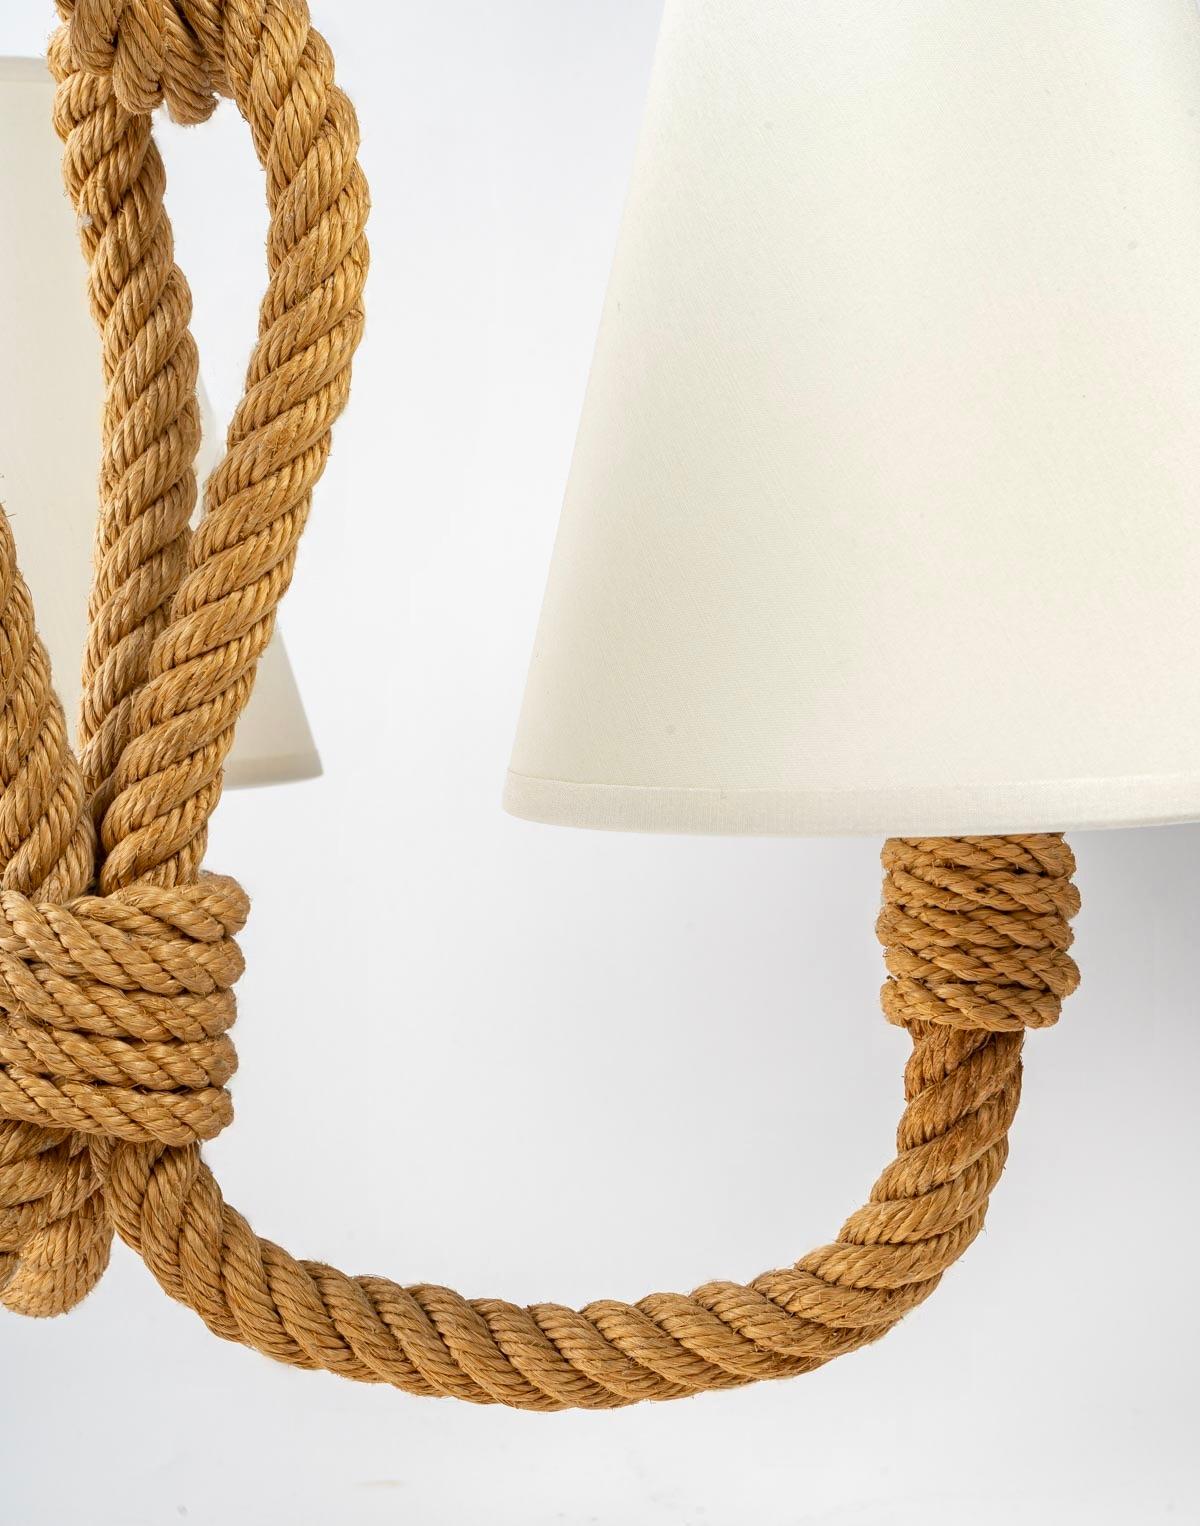 Composed of 3 rope light arms dressed with off-white cotton lampshades of trapezoidal shape.
The 3 arms of lights are connected between them by a wire of rope and decorated with a loop on the higher part ending in a bell of rope acting as an